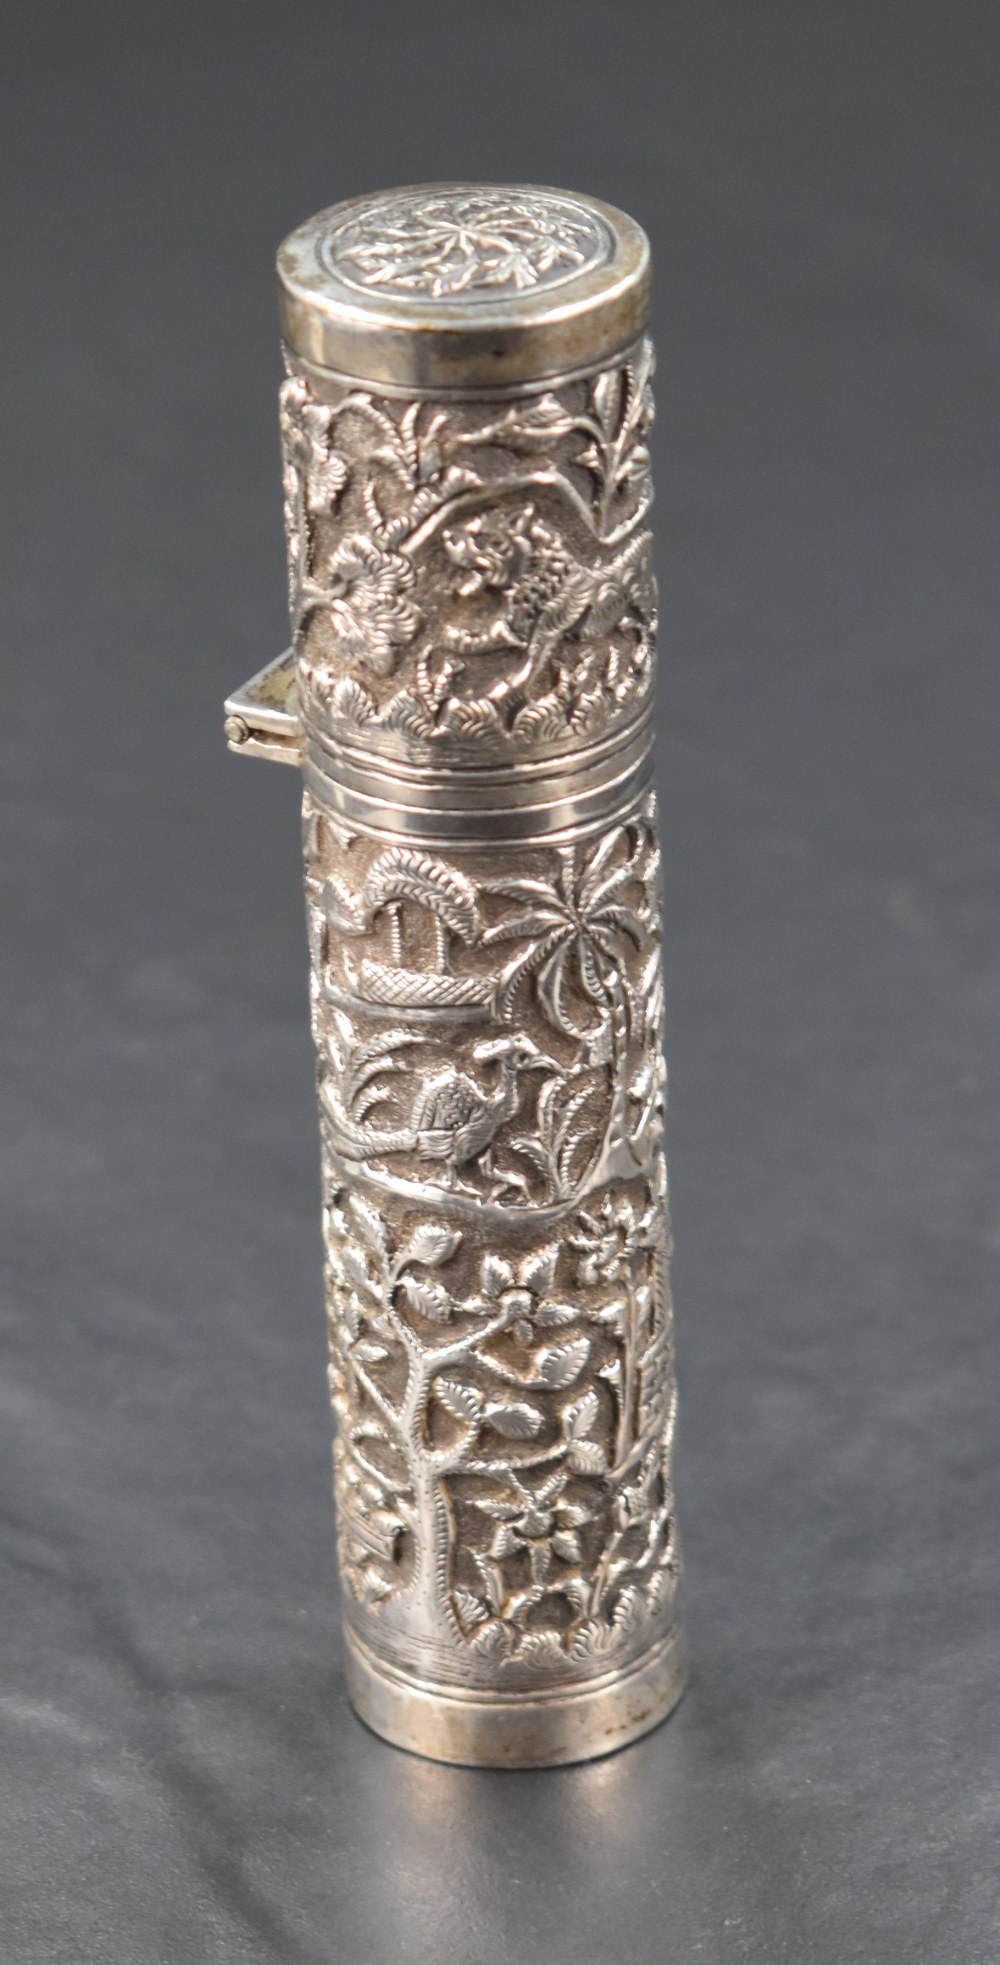 A late 19th/early 20th century Indian or Burmese white metal bodkin holder or etui, of cylindrical